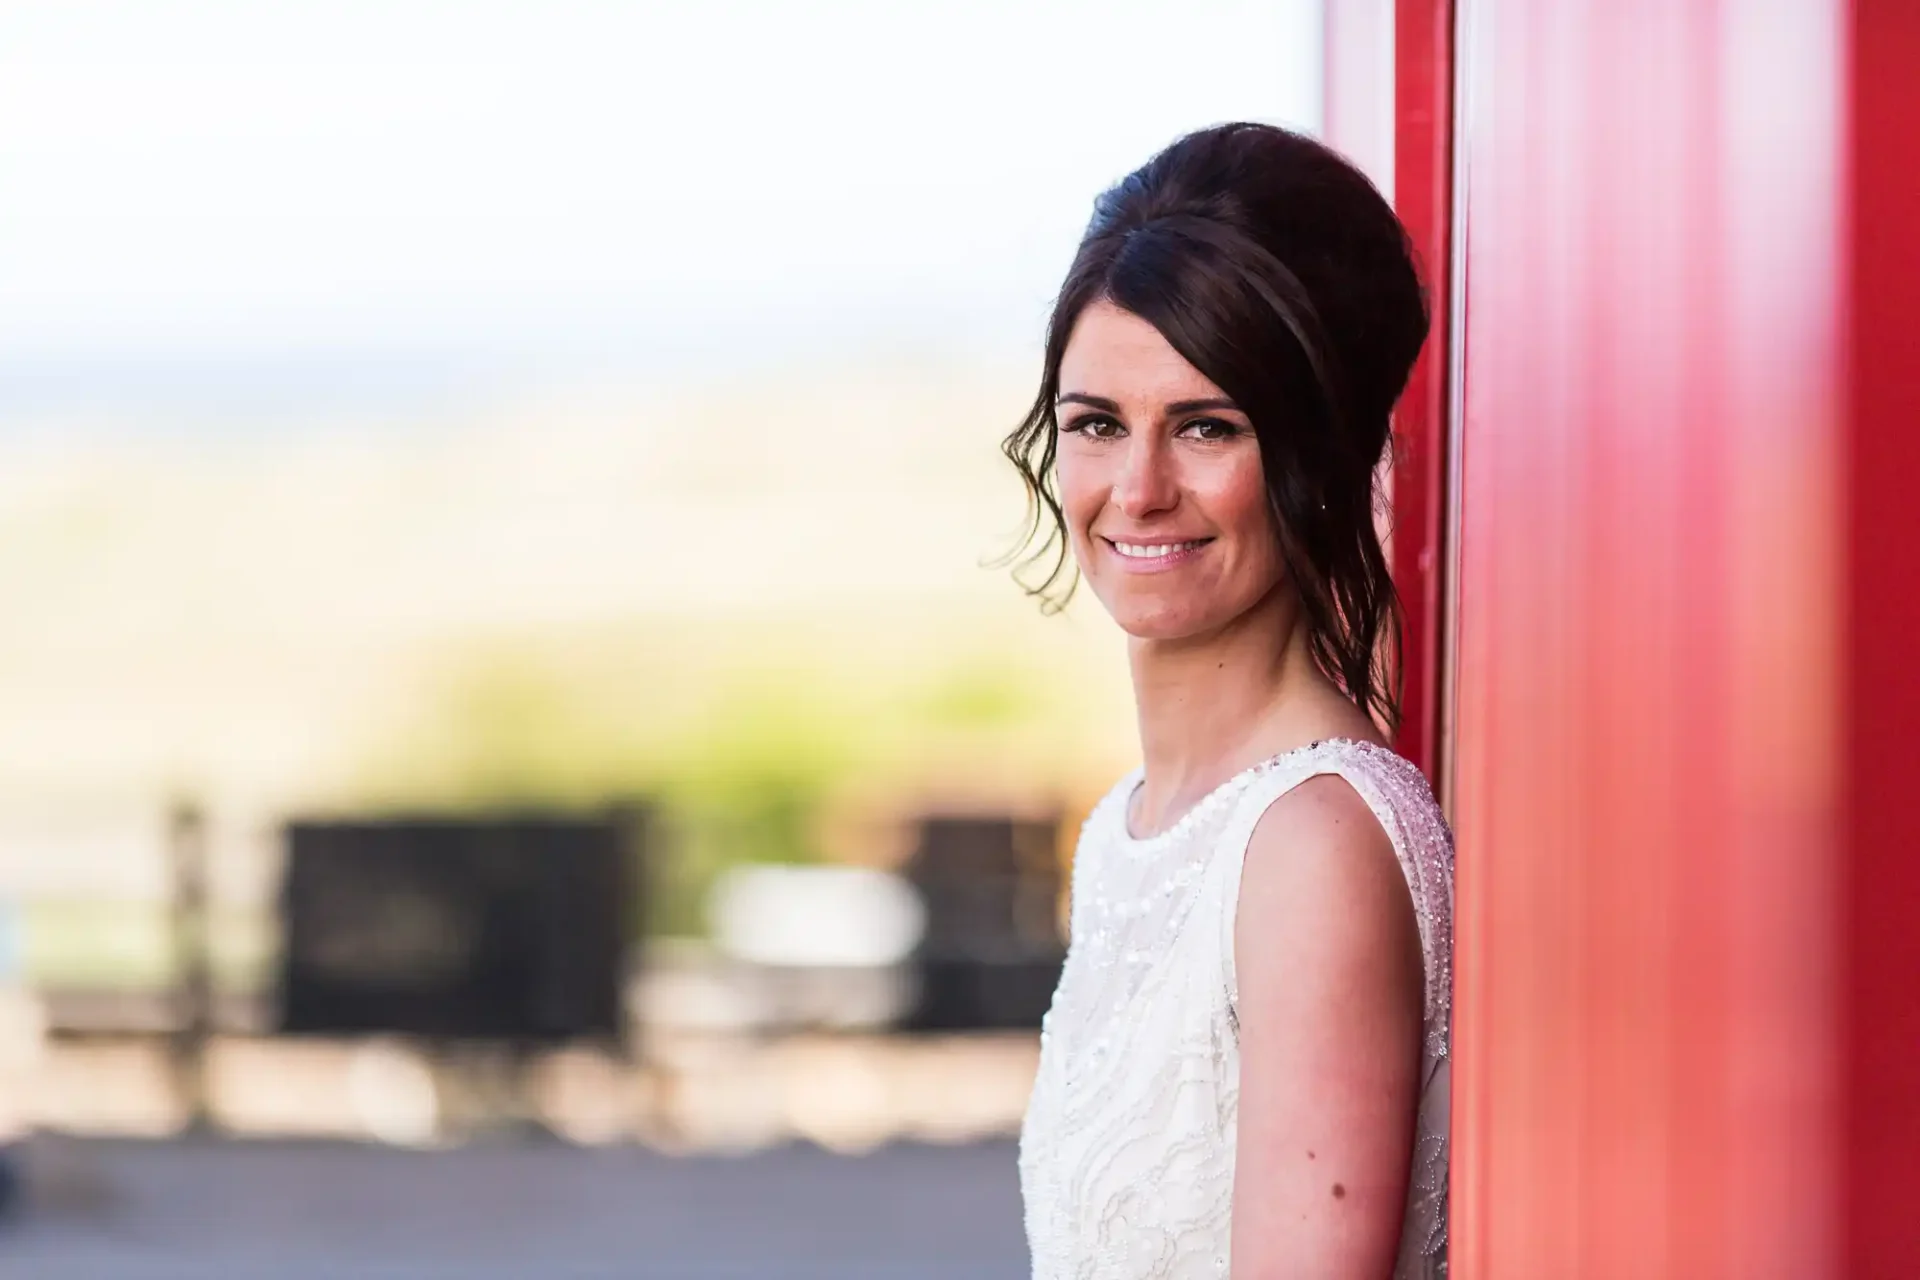 A bride in a white dress smiles gently, standing against a bright red background, with a scenic landscape faintly visible in the distance.